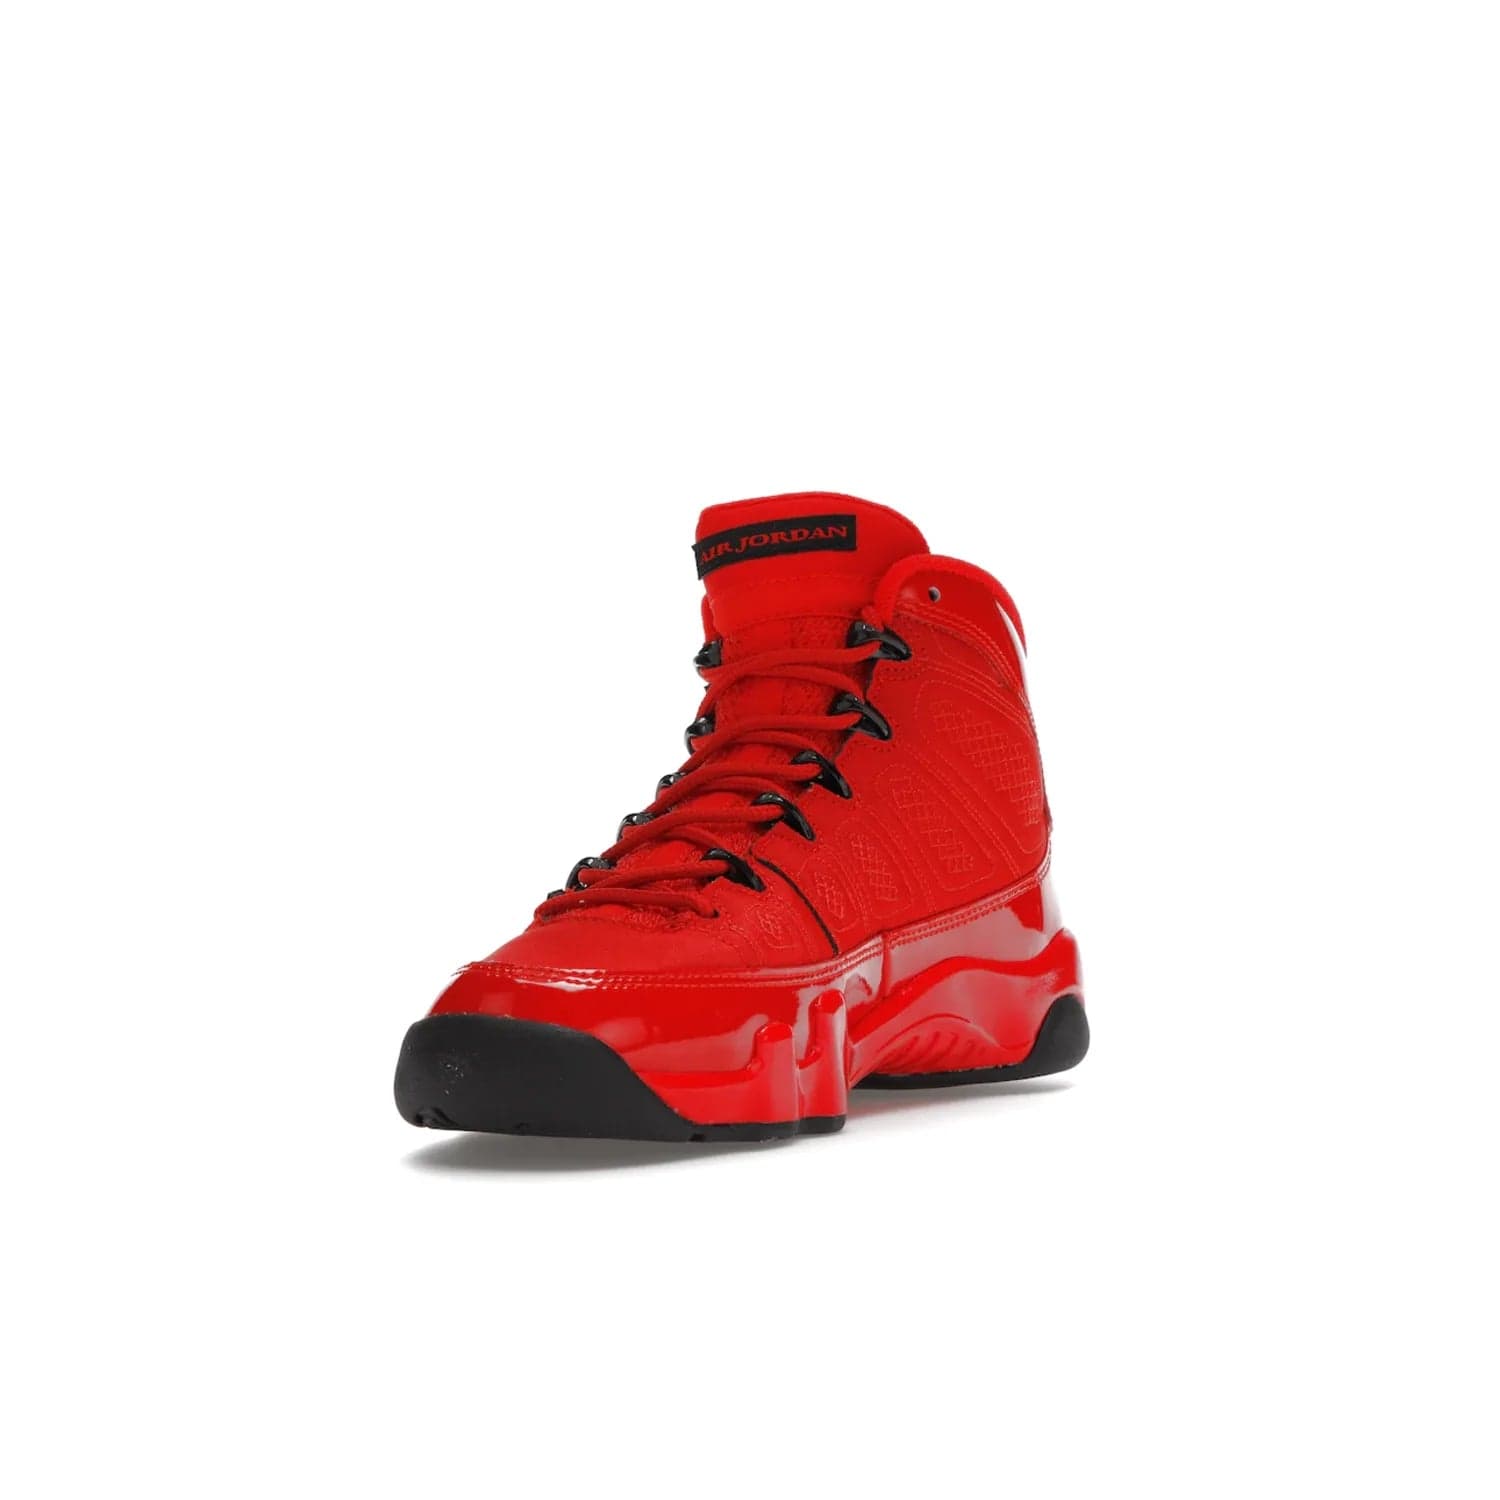 Jordan 9 Retro Chile Red (GS) - Image 13 - Only at www.BallersClubKickz.com - Introducing the Air Jordan 9 Retro Chile Red (GS), a vintage 1993 silhouette with fiery colorway. Features quilted side paneling, glossy patent leather, pull tabs, black contrast accents, and foam midsole. Launching May 2022 for $140.